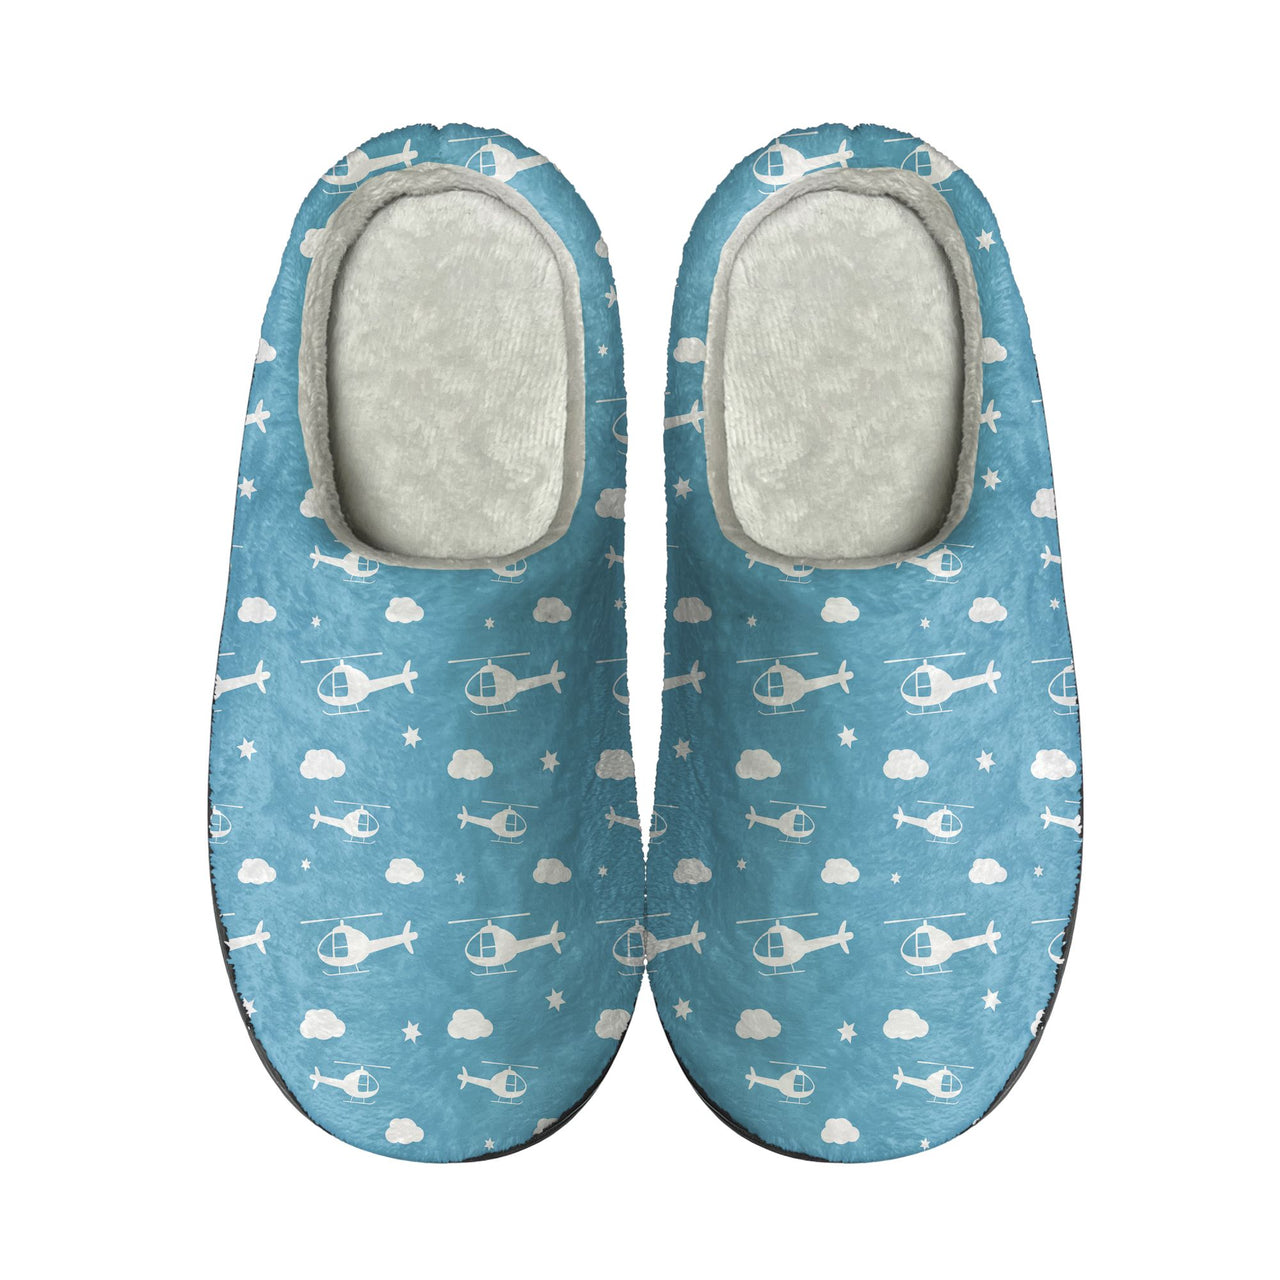 Helicopters & Clouds Designed Cotton Slippers